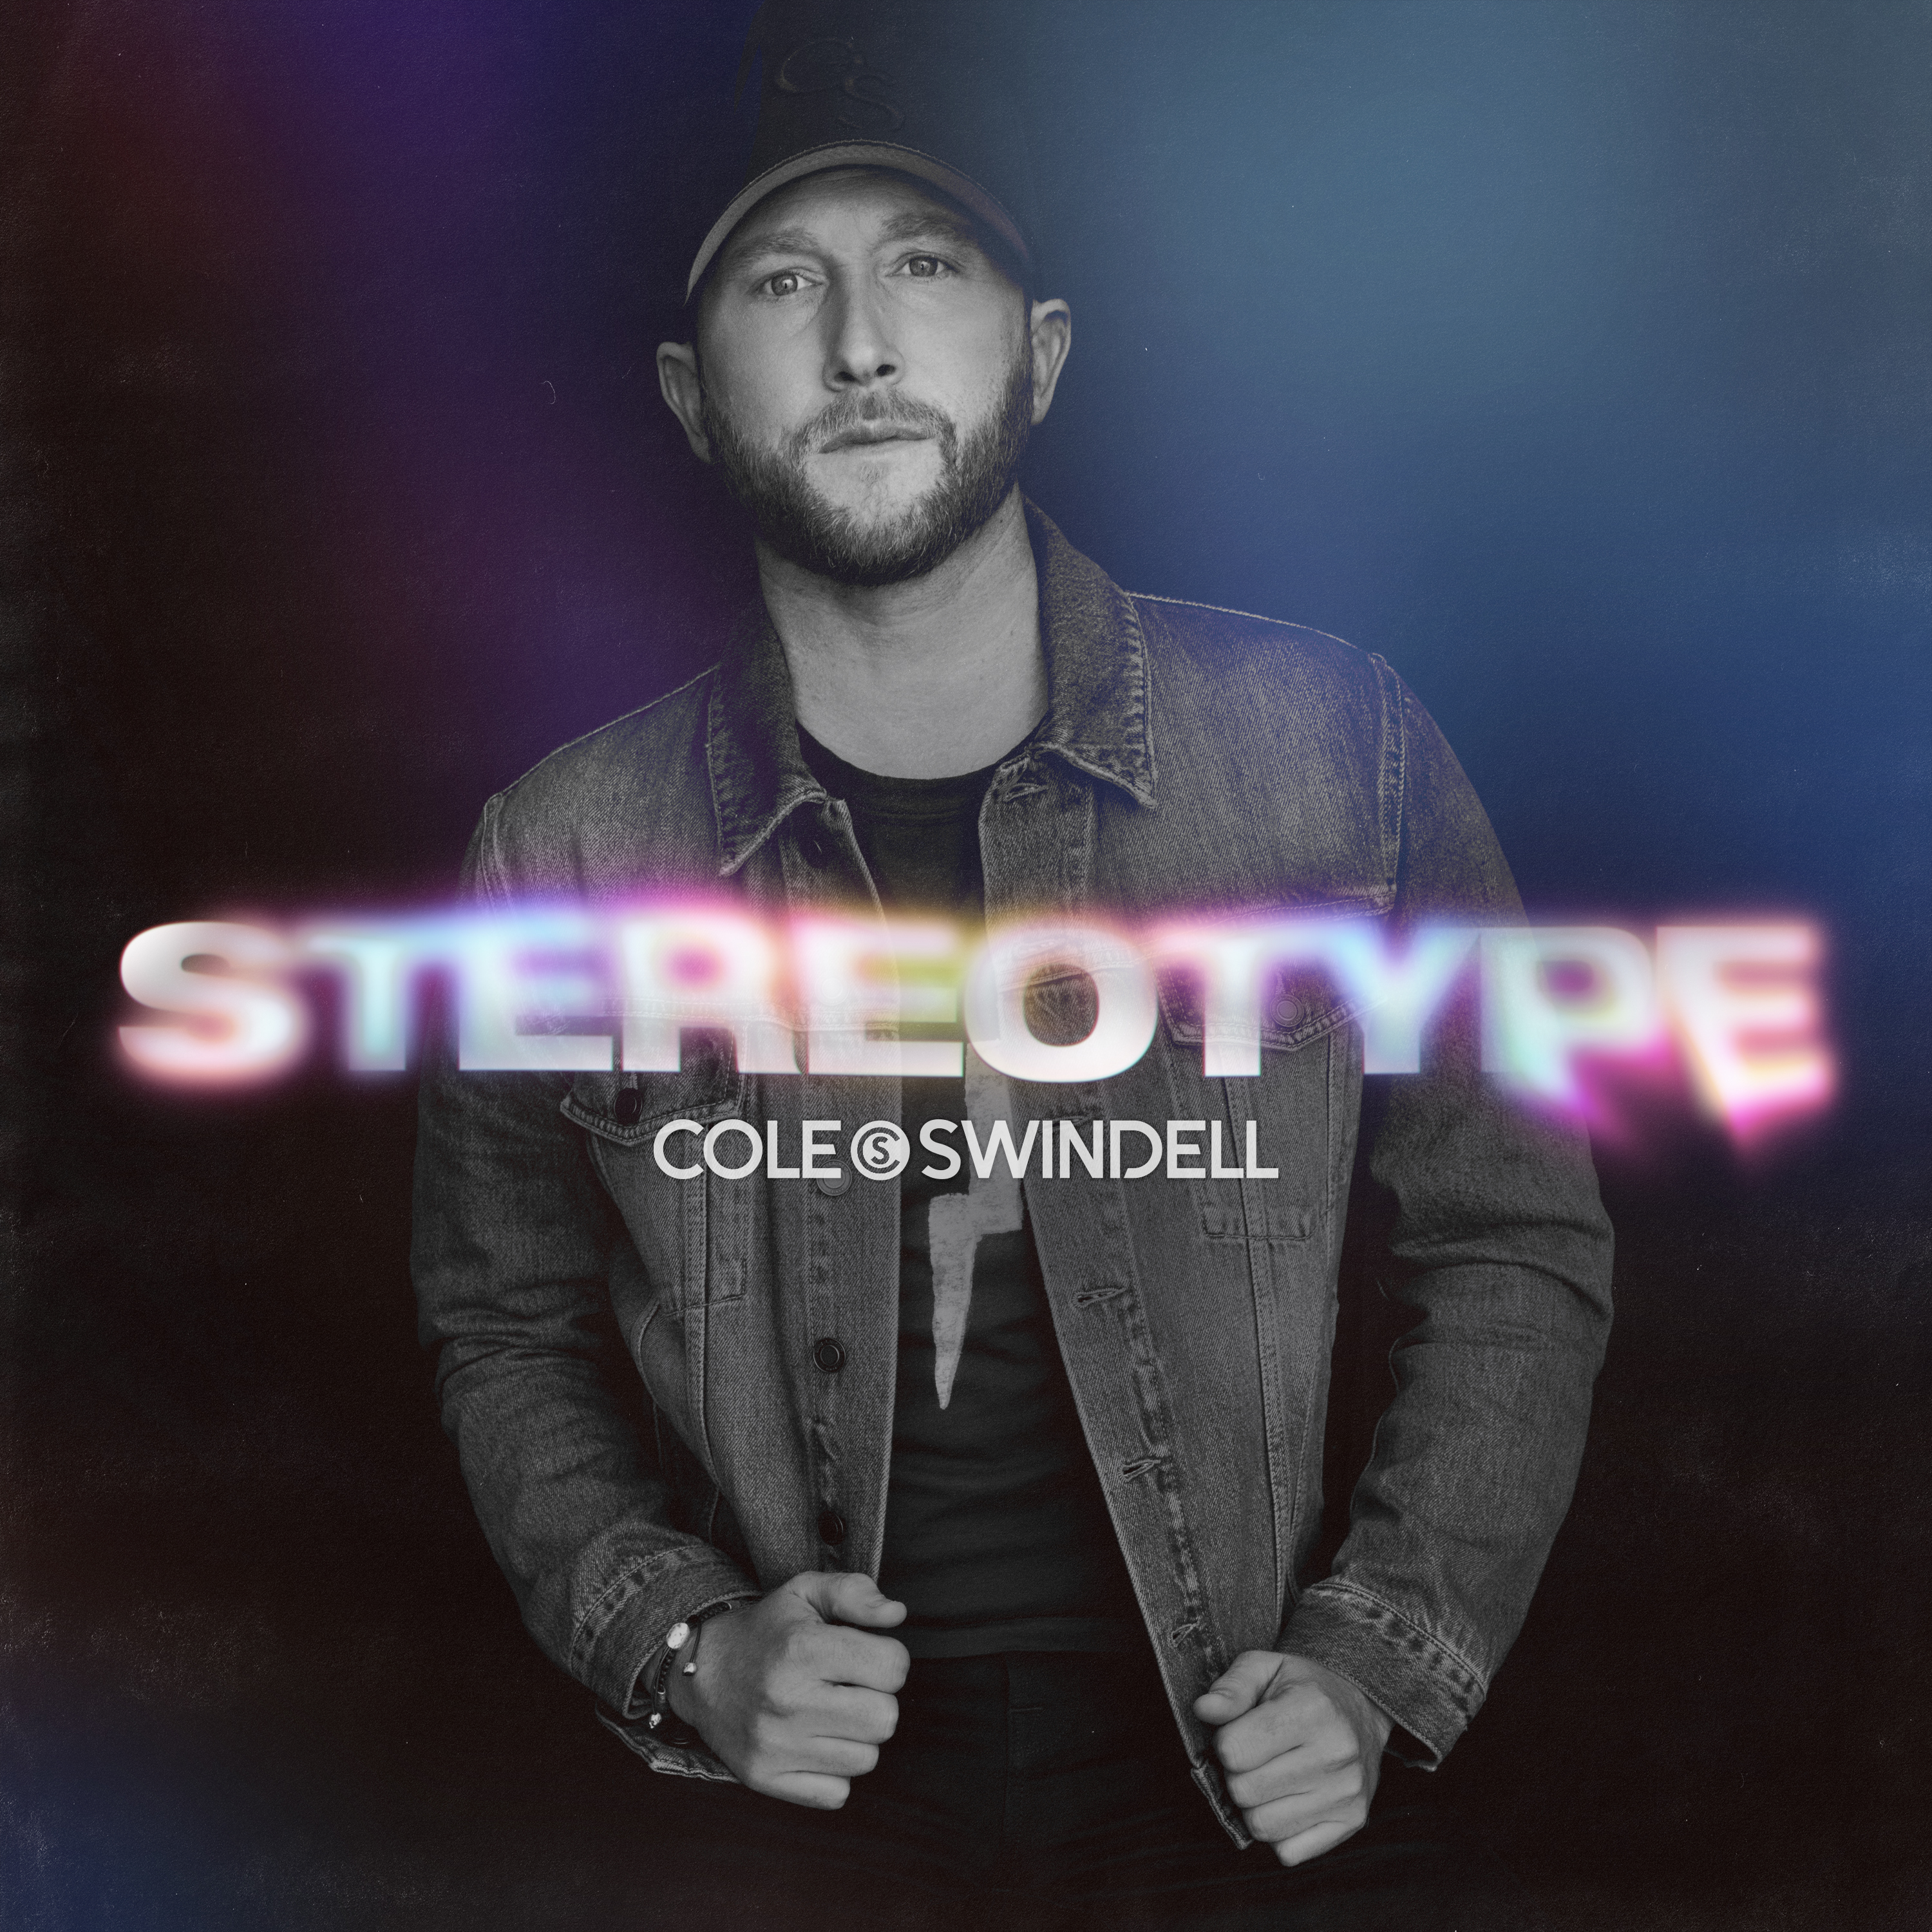 COLE SWINDELL TO RELEASE FOURTH STUDIO ALBUM, 'STEREOTYPE,' APRIL 8